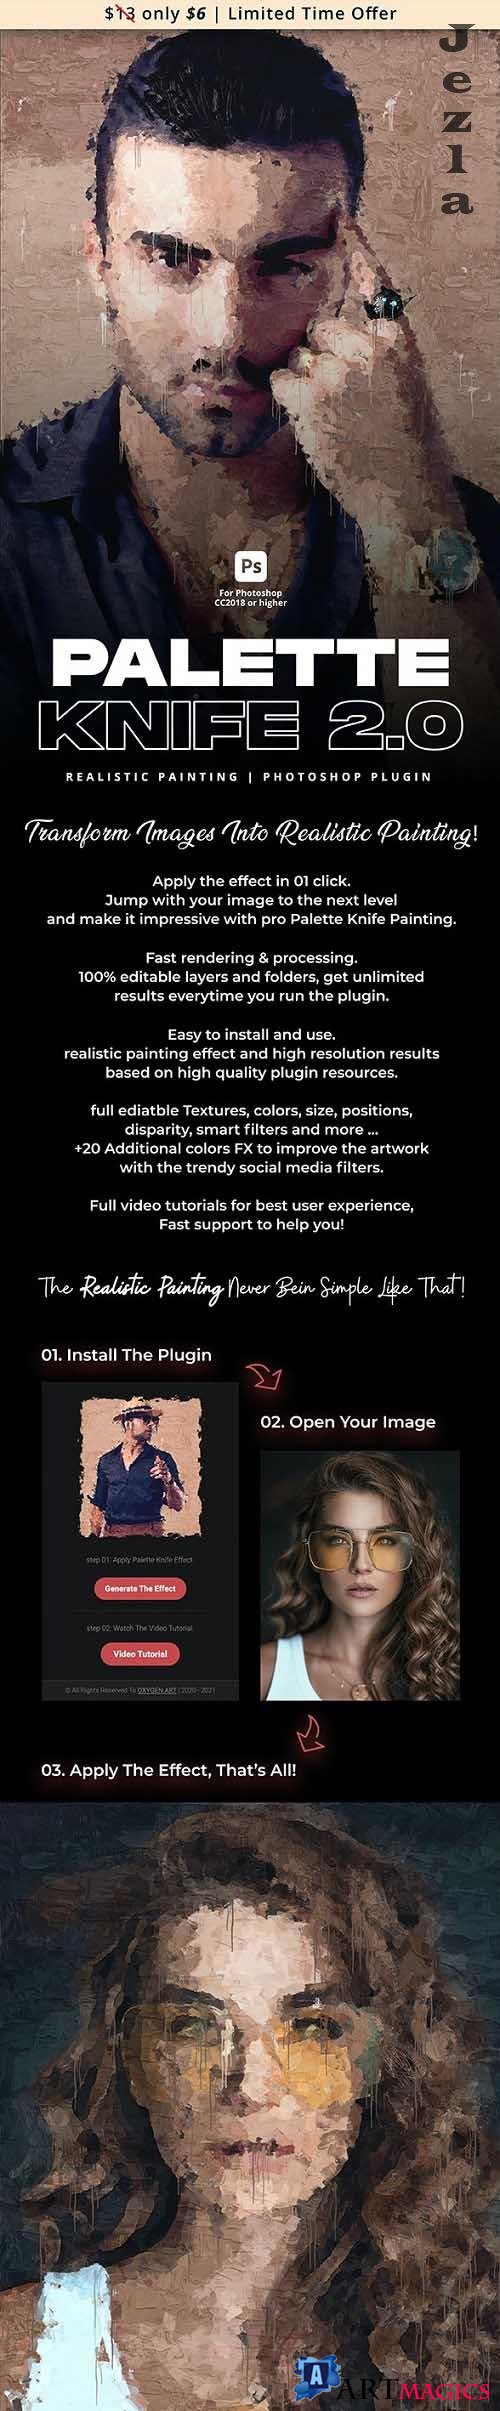 Palette Knife 2.0 | Realistic Painting Photoshop Plugin - 34915390